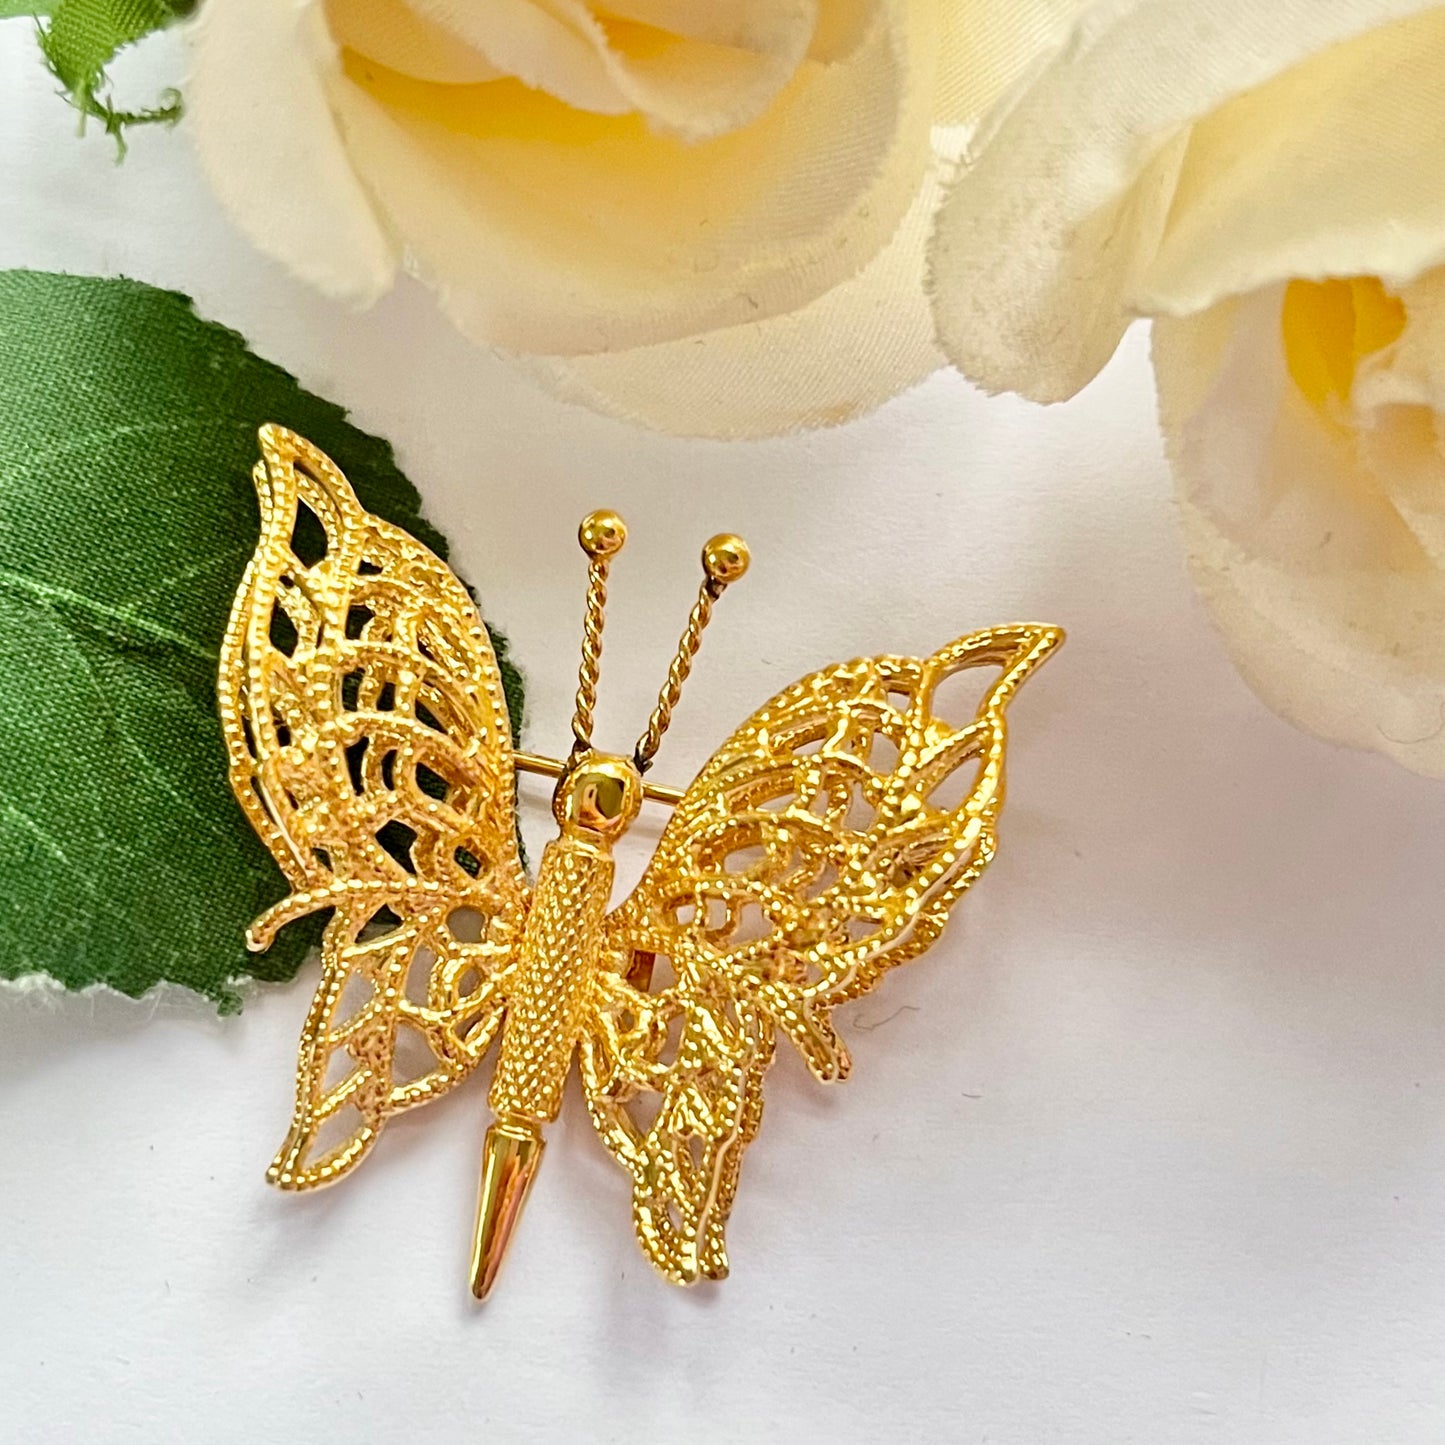 1980s Monet Gold Plated Butterfly Brooch